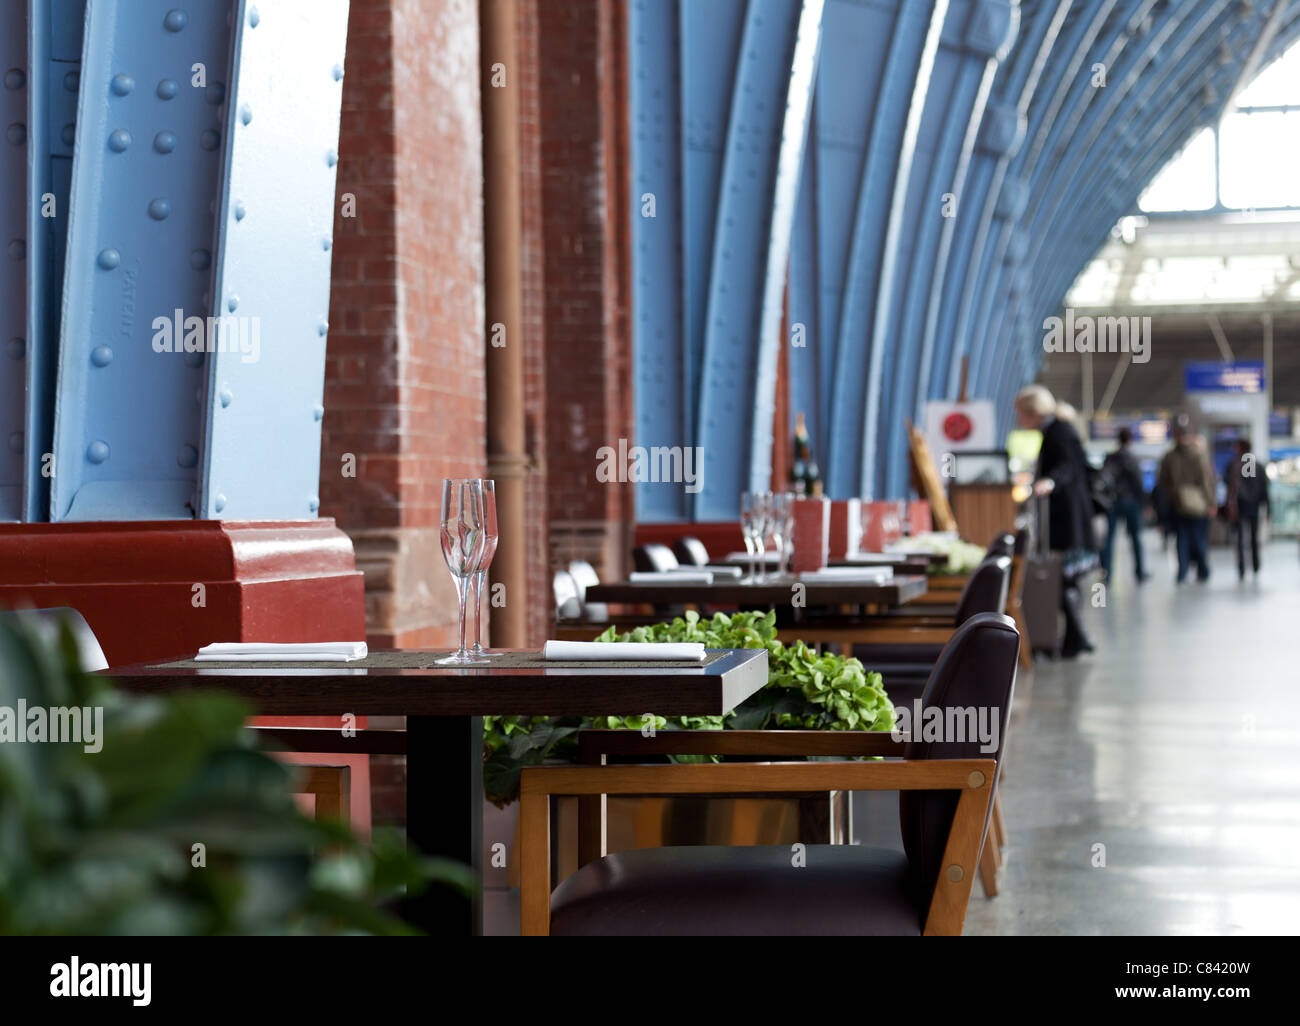 Restaurant or cafe tables along the wall at english train station in London Stock Photo